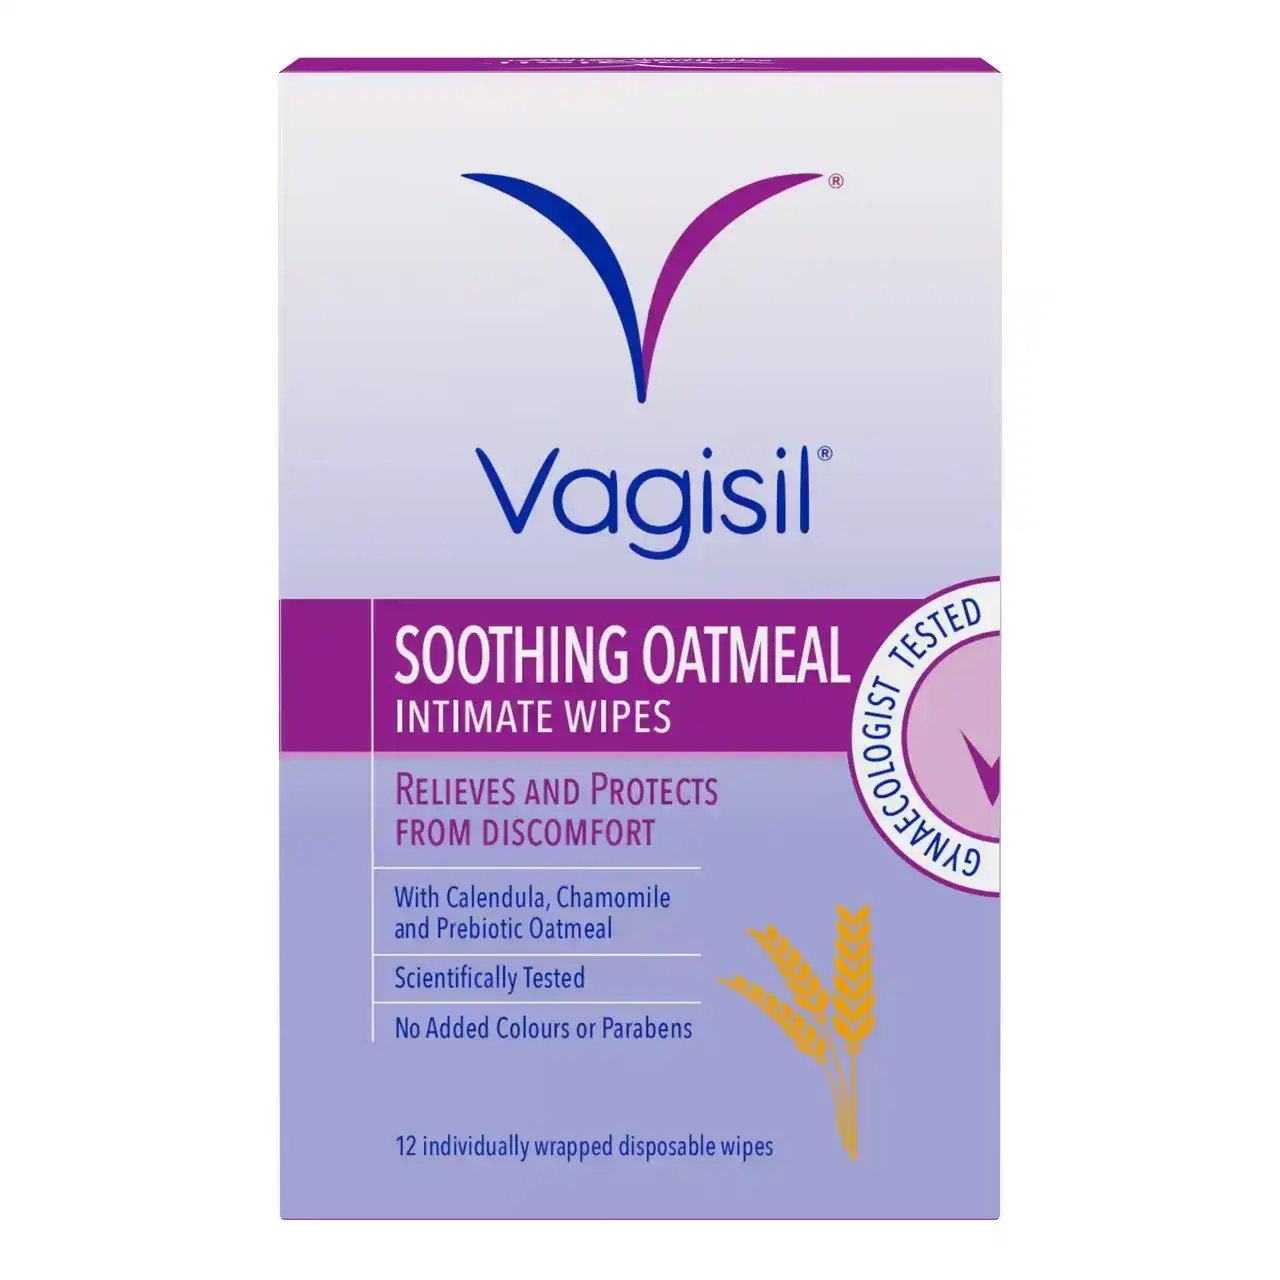 Vagisil Soothing Oatmeal Intimate Wipes 12s